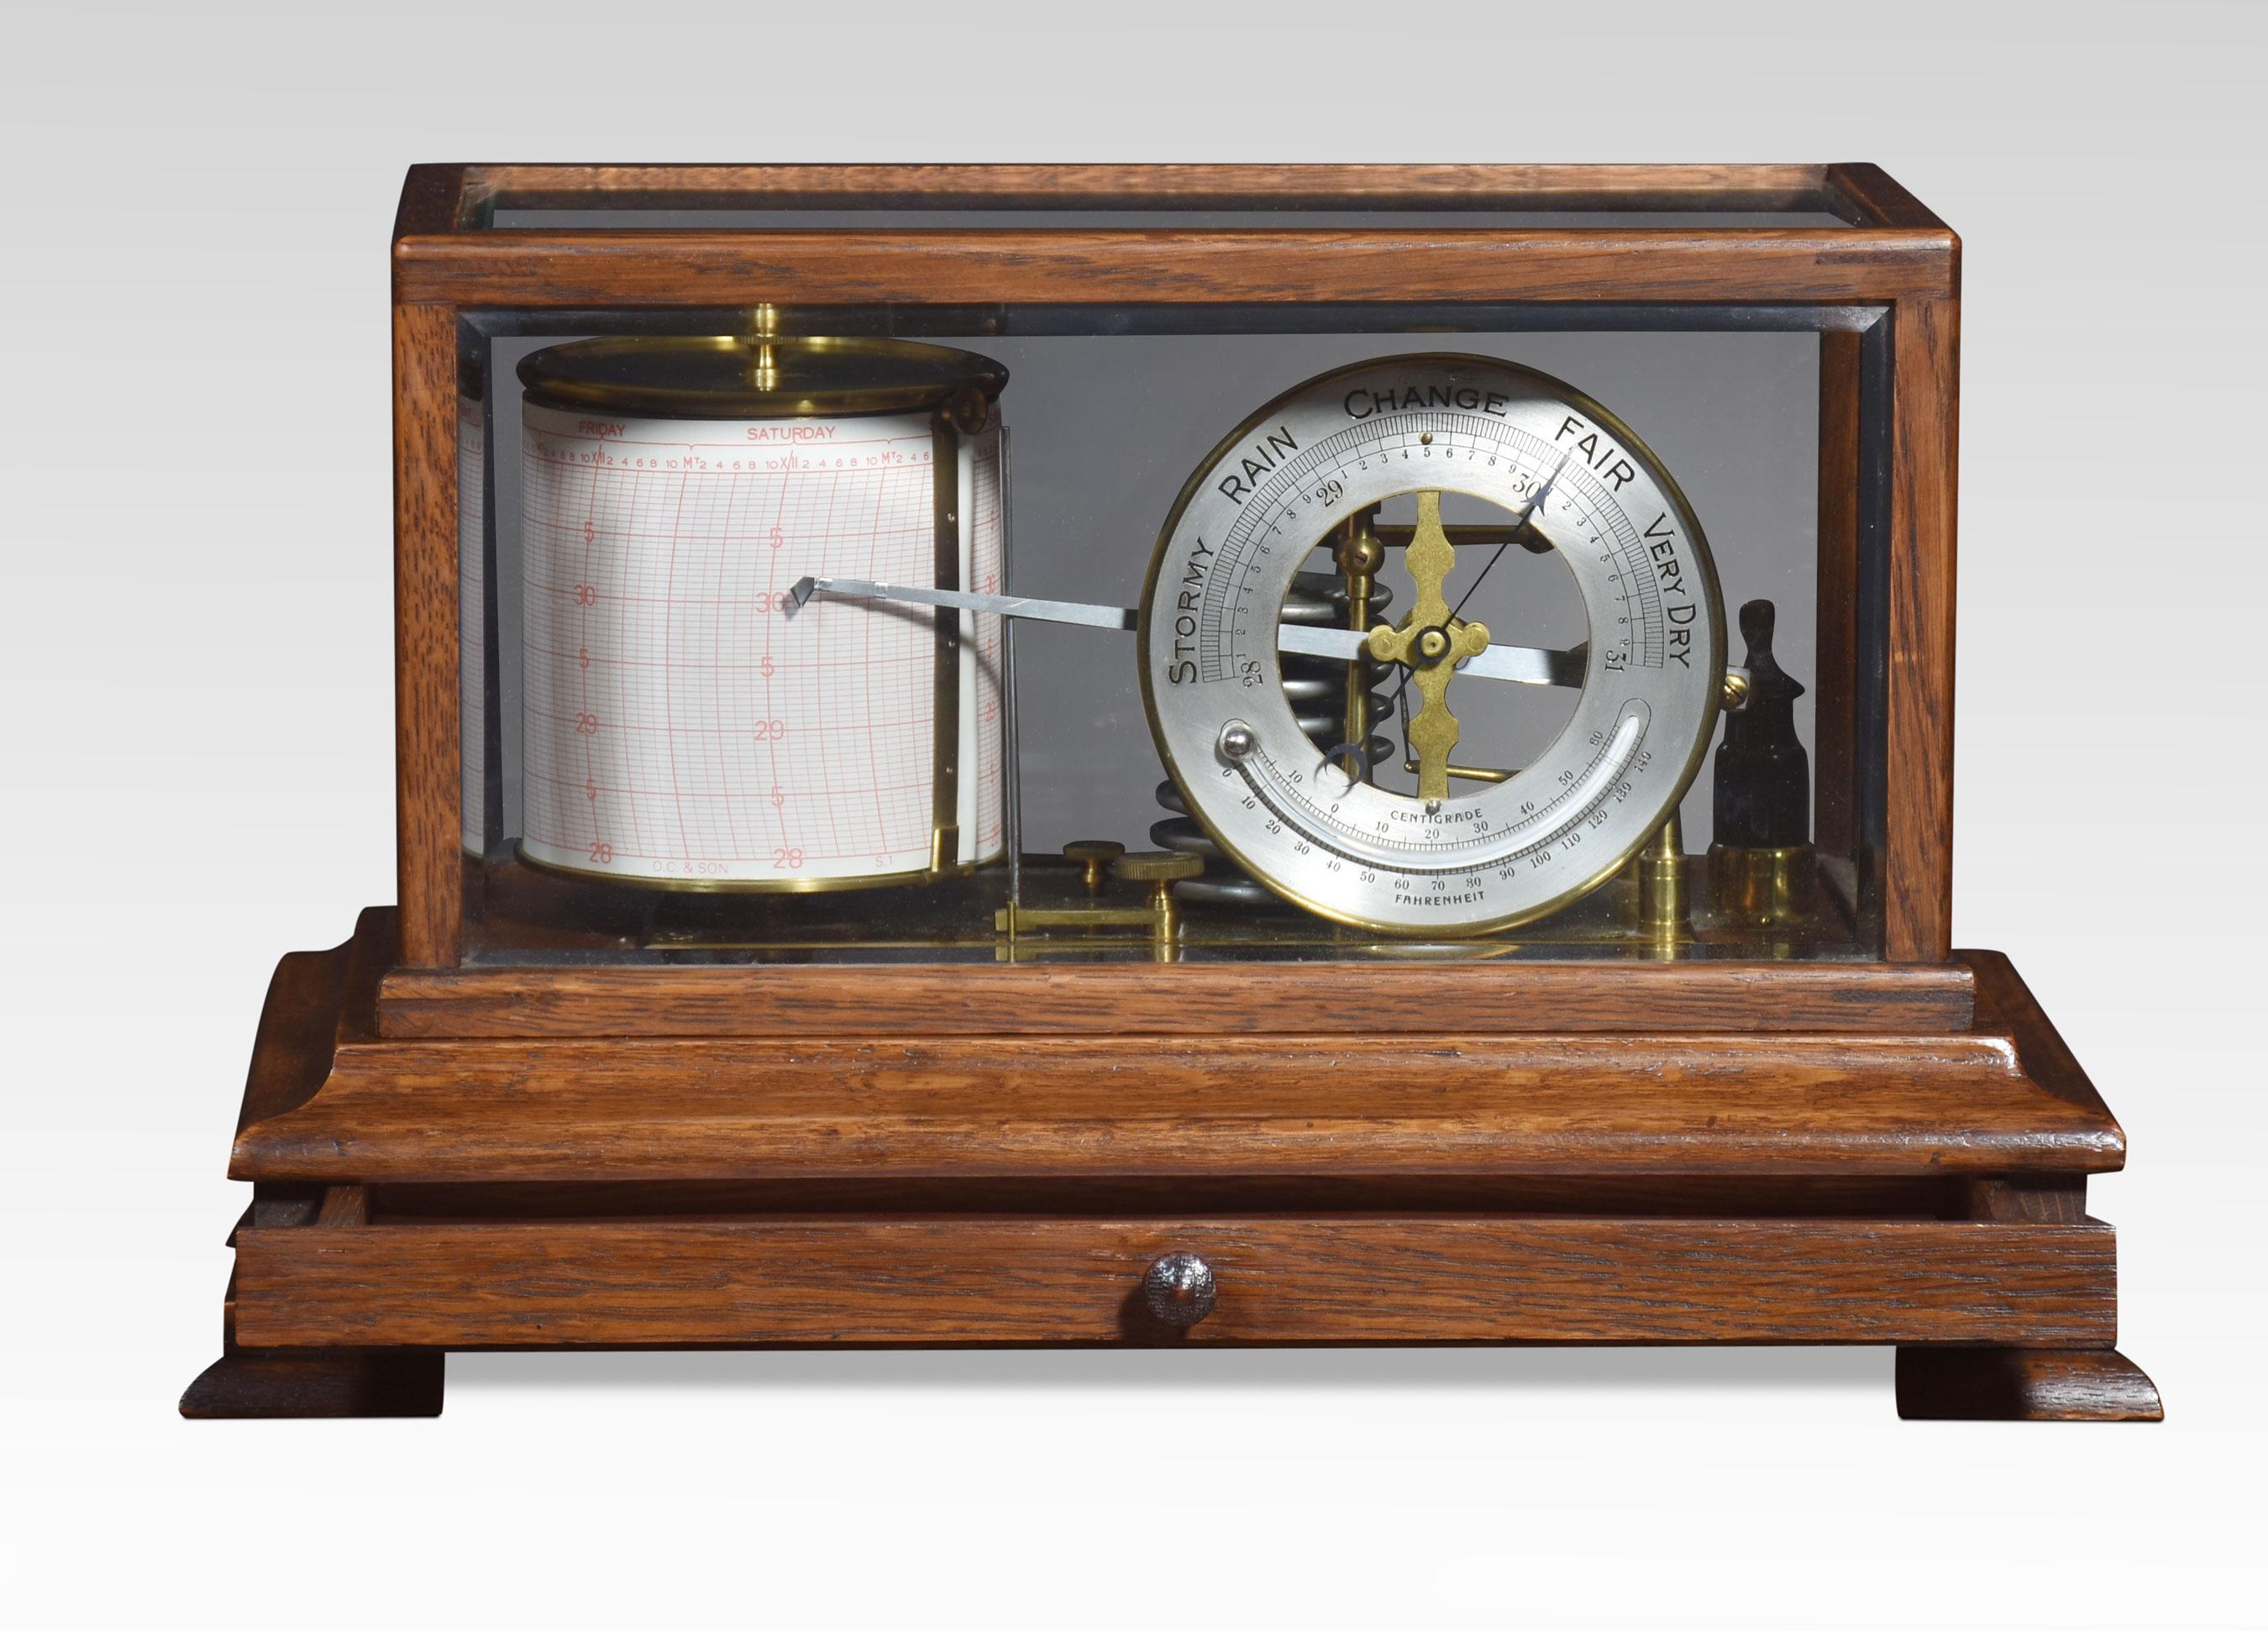 Oak-cased barograph and barometer retailed by Harrods London, having five bevelled glass panelled removable lid, and a drawer below to house the charts. The mechanical eight-day movement is housed in the drum, fitted with a seven-day chart which